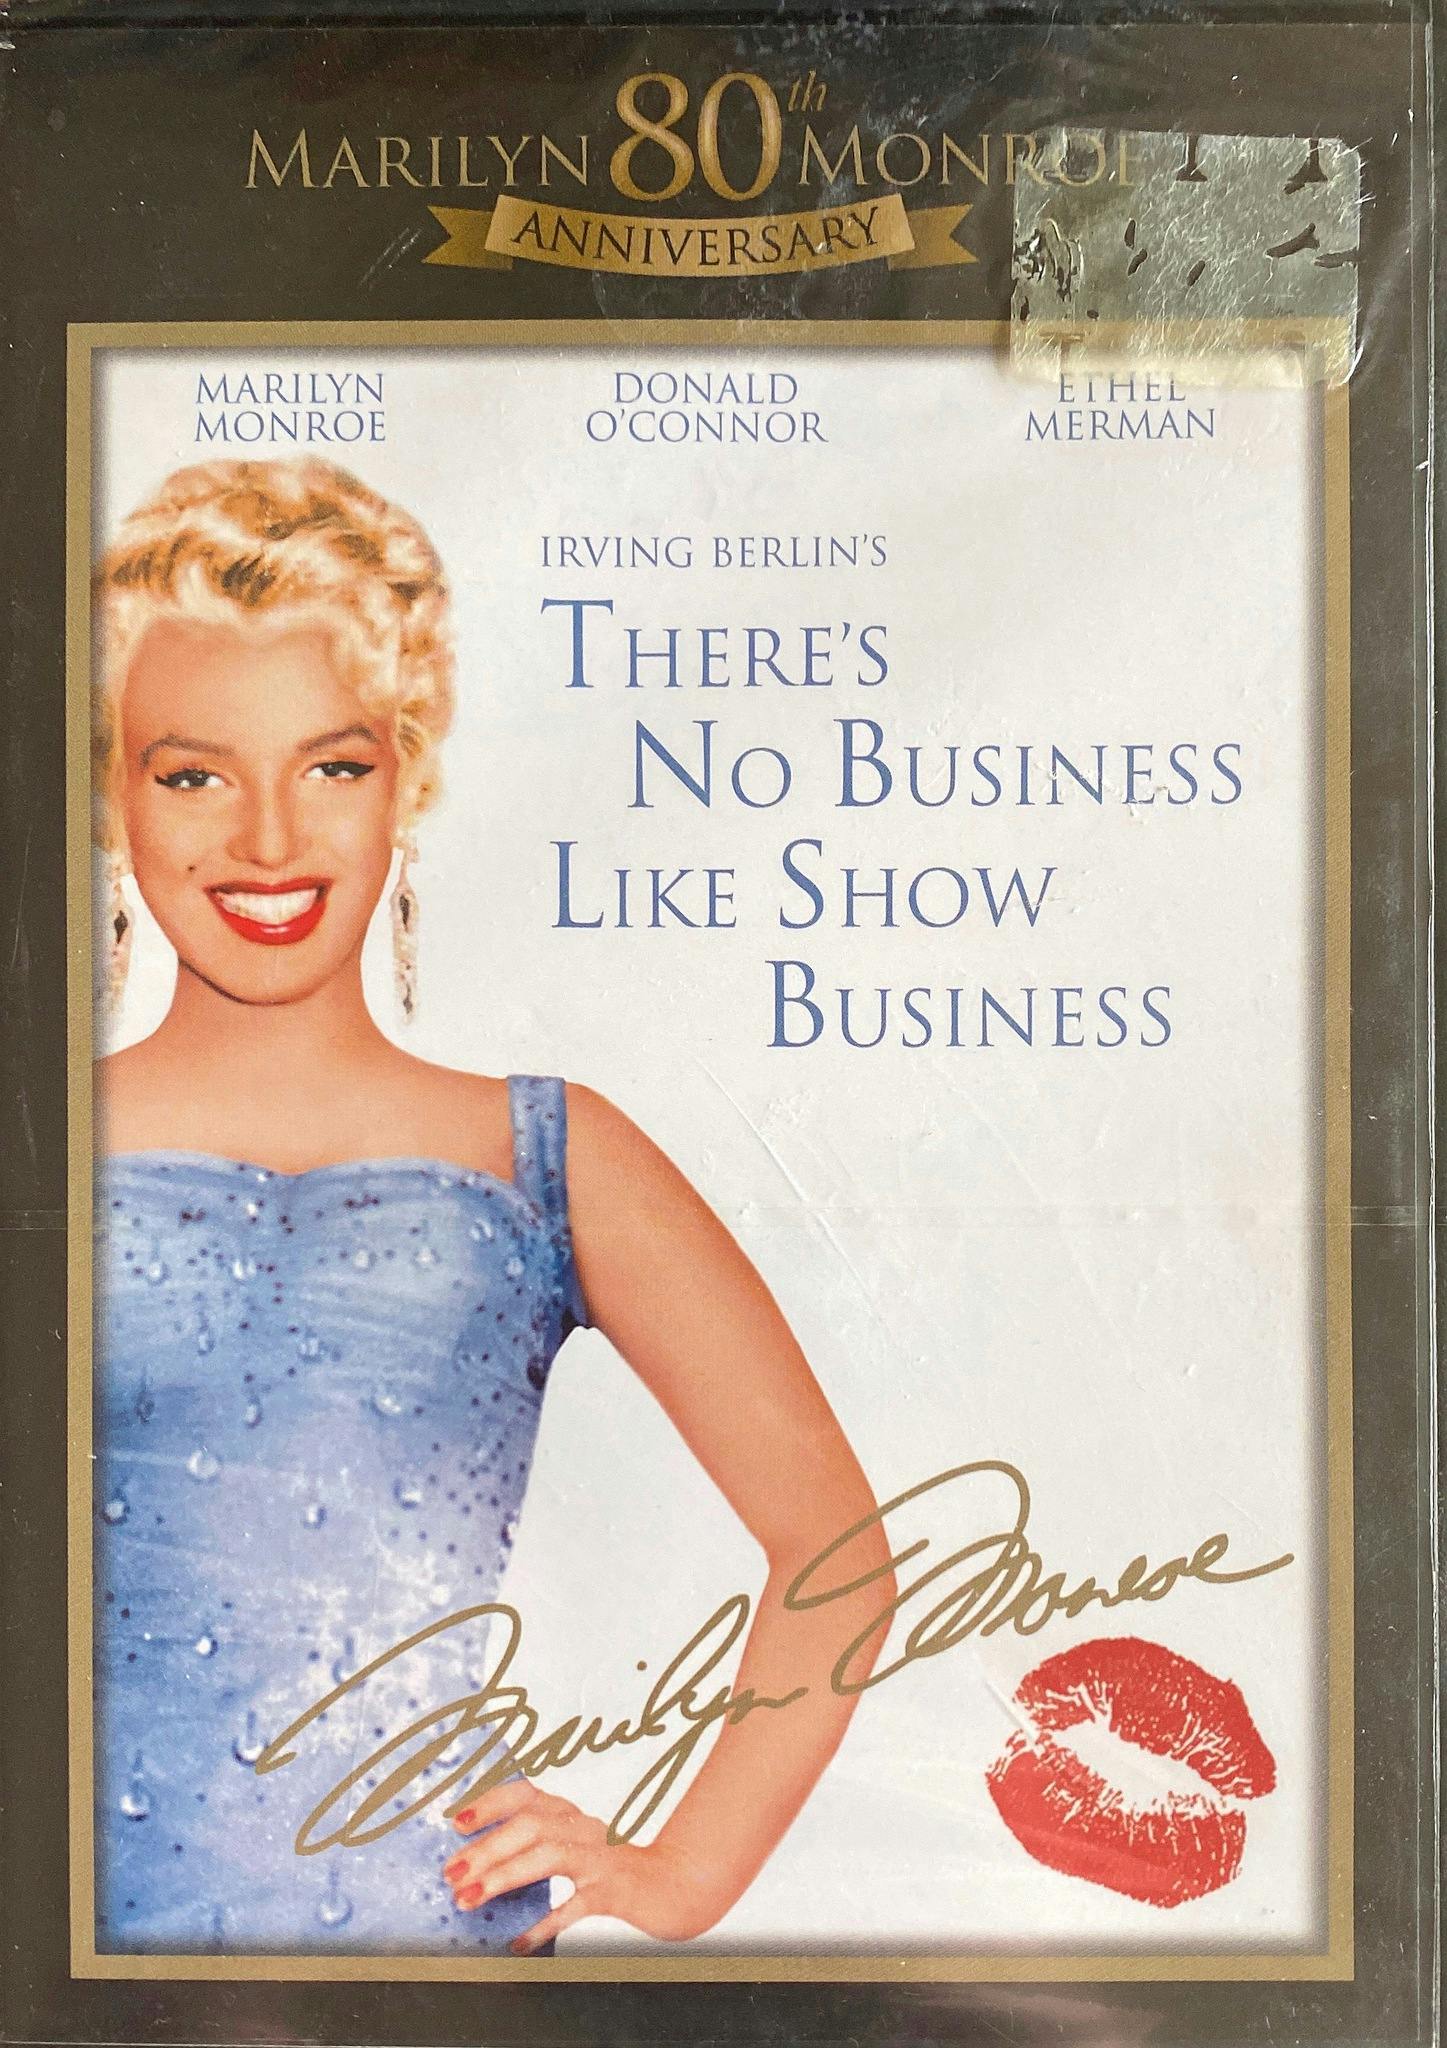 There's No Business Like Show Business - 80th Anniversary (DVD)